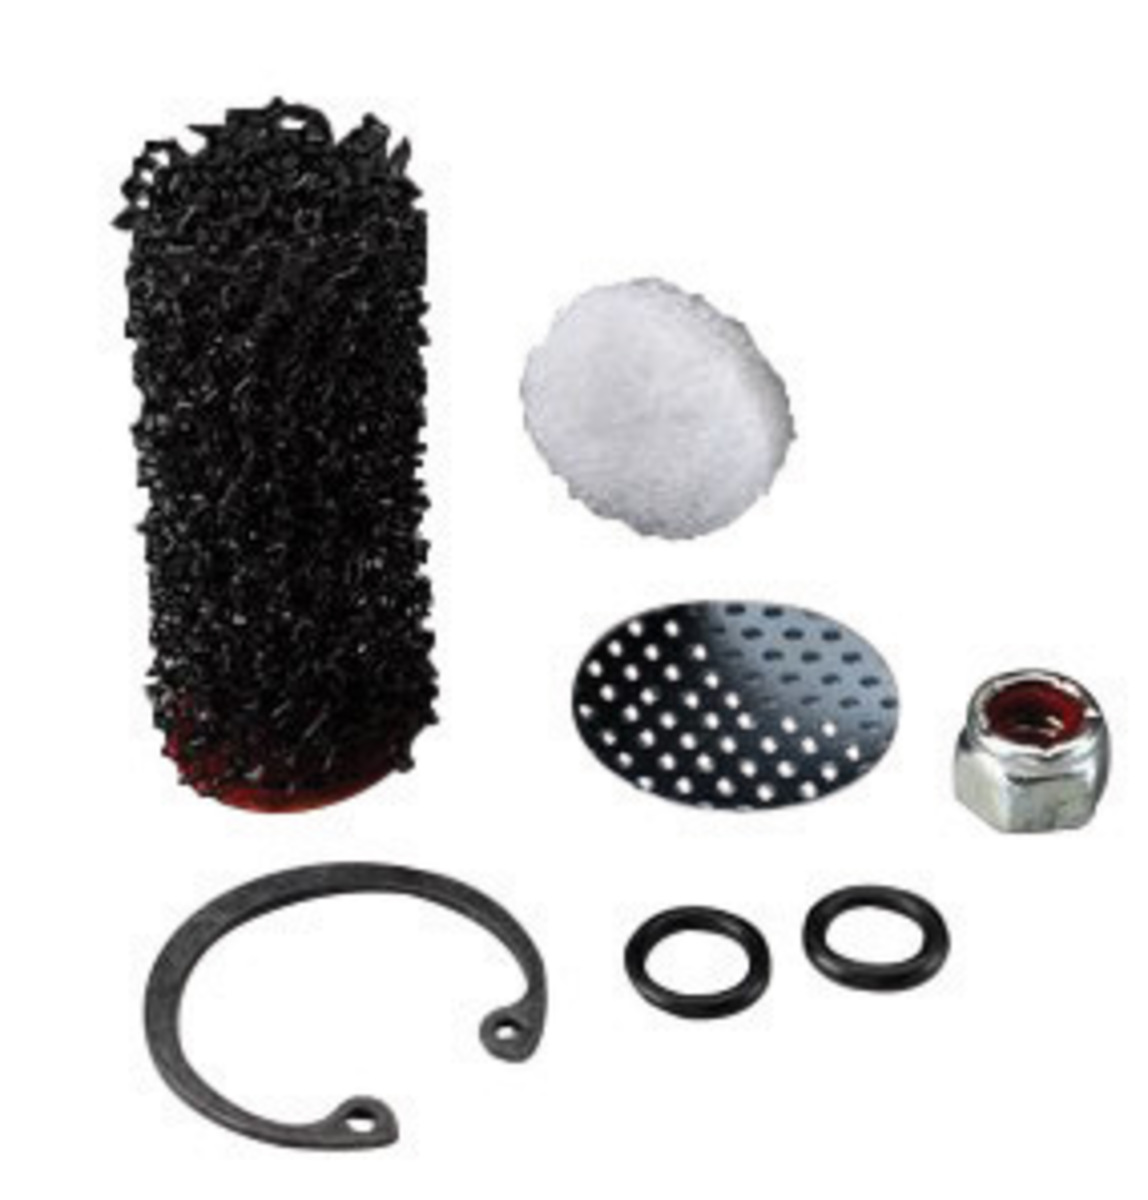 3M™ High Pressure Versaflo™ Black/White Air Regulating Valve Spare Parts Kit (Includes Retaining Ring Screen, Disc Nut, O-Rings,